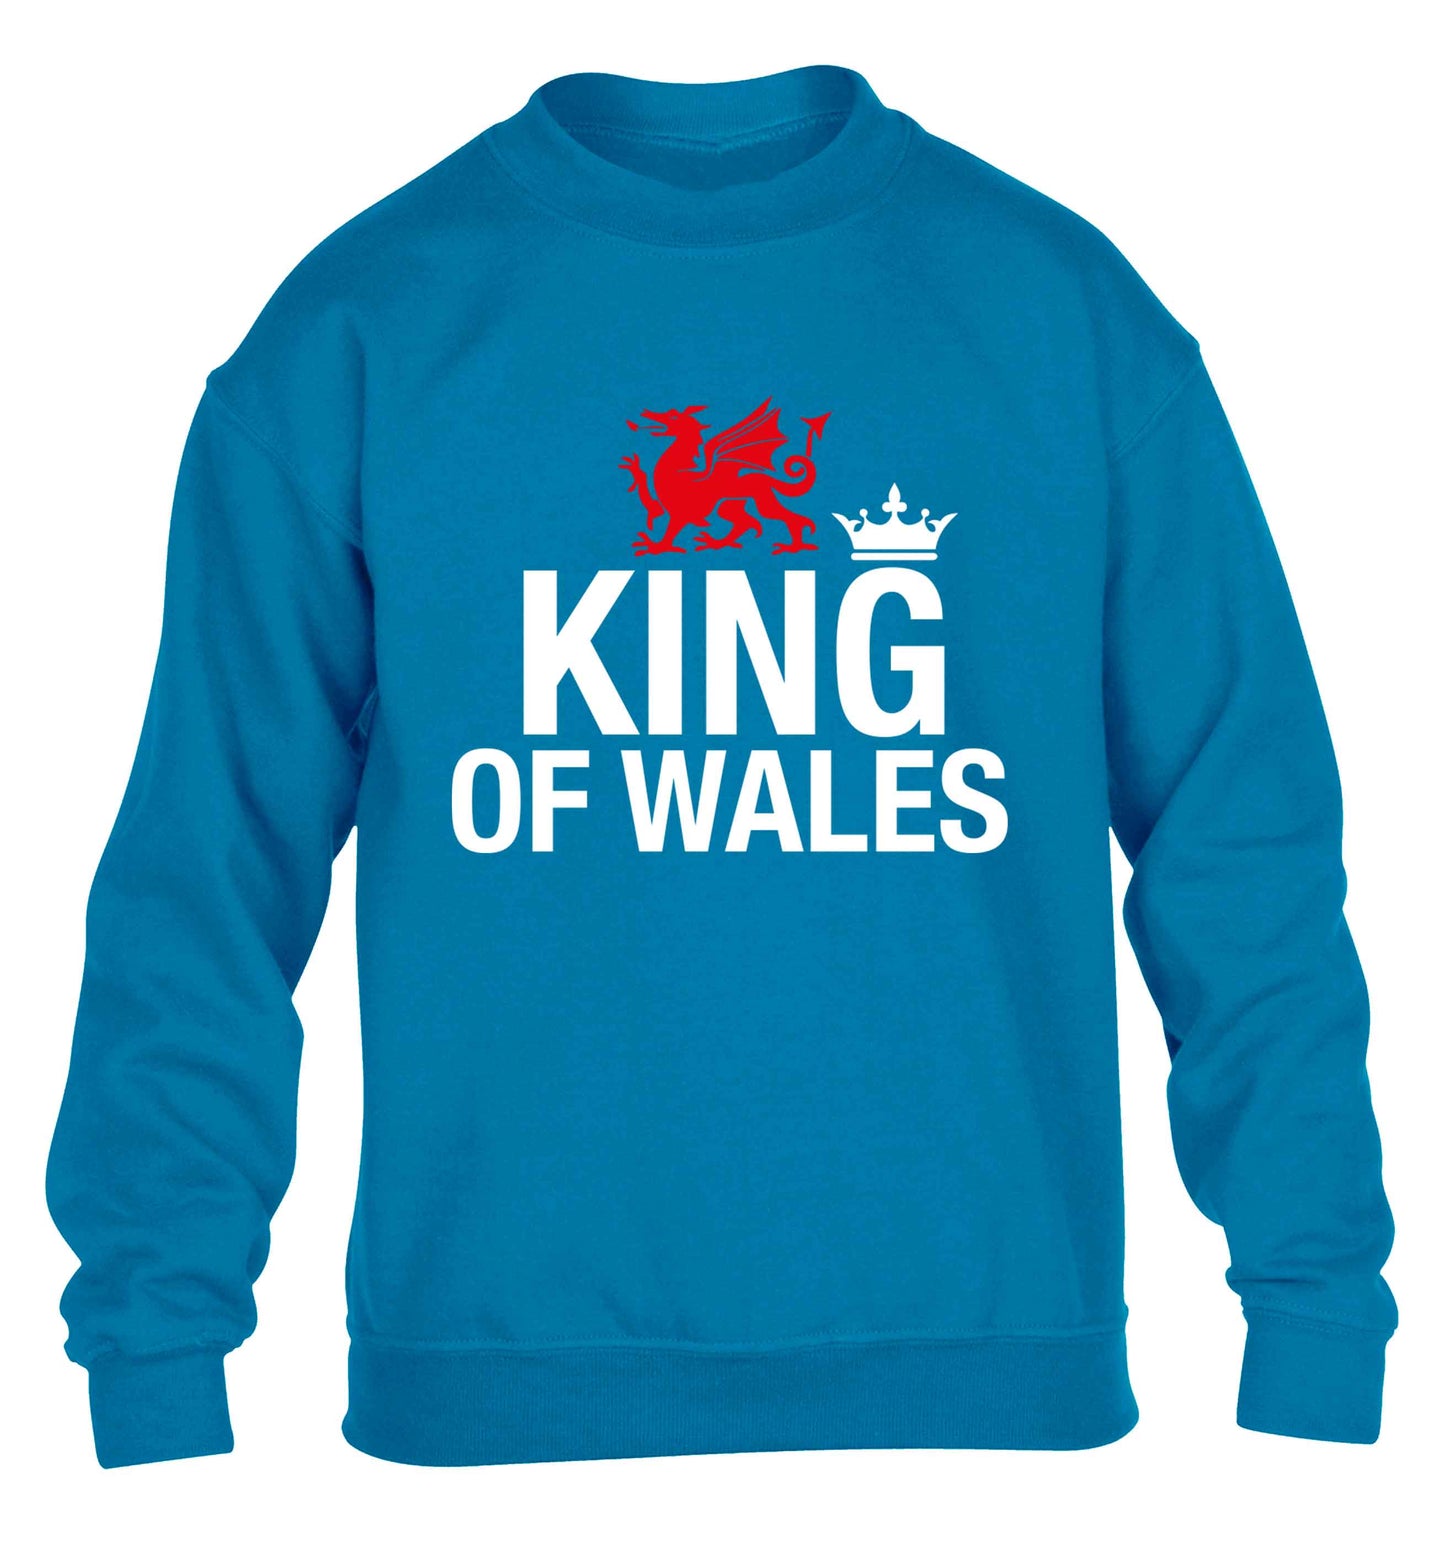 King of Wales children's blue sweater 12-13 Years